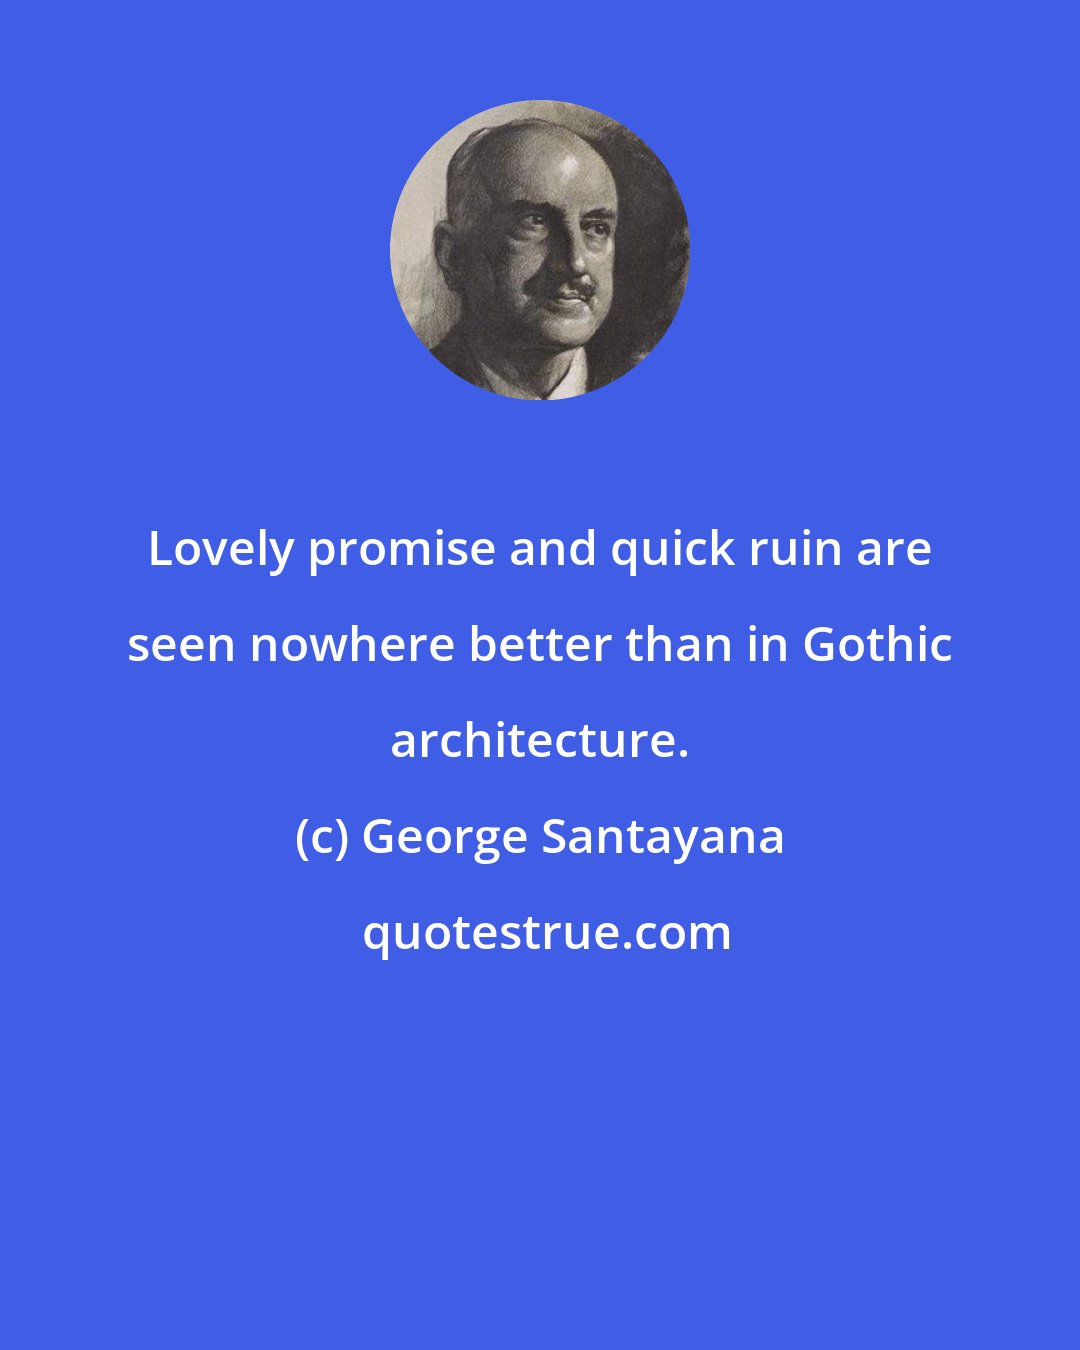 George Santayana: Lovely promise and quick ruin are seen nowhere better than in Gothic architecture.